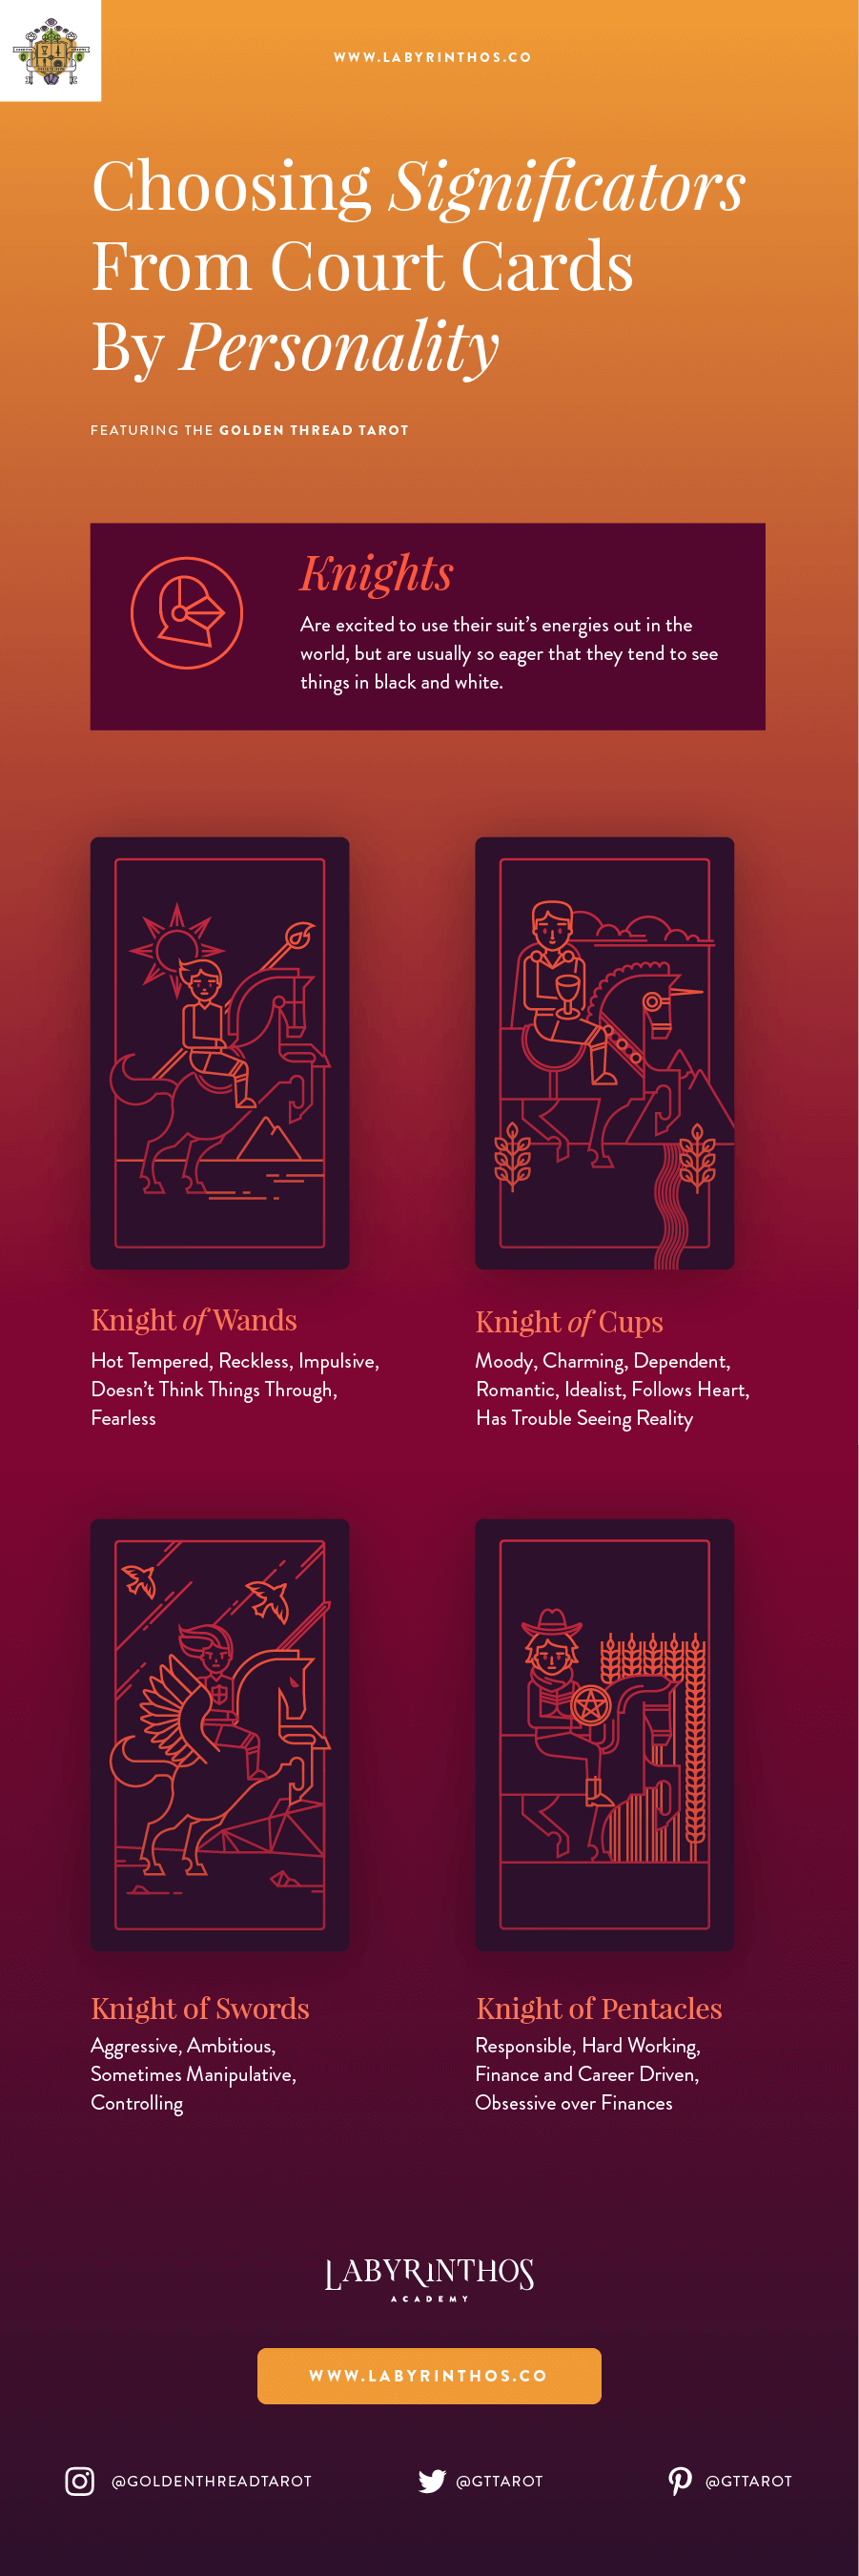 The Personalities of the Knights: Tarot Court Cards as Significators in Tarot